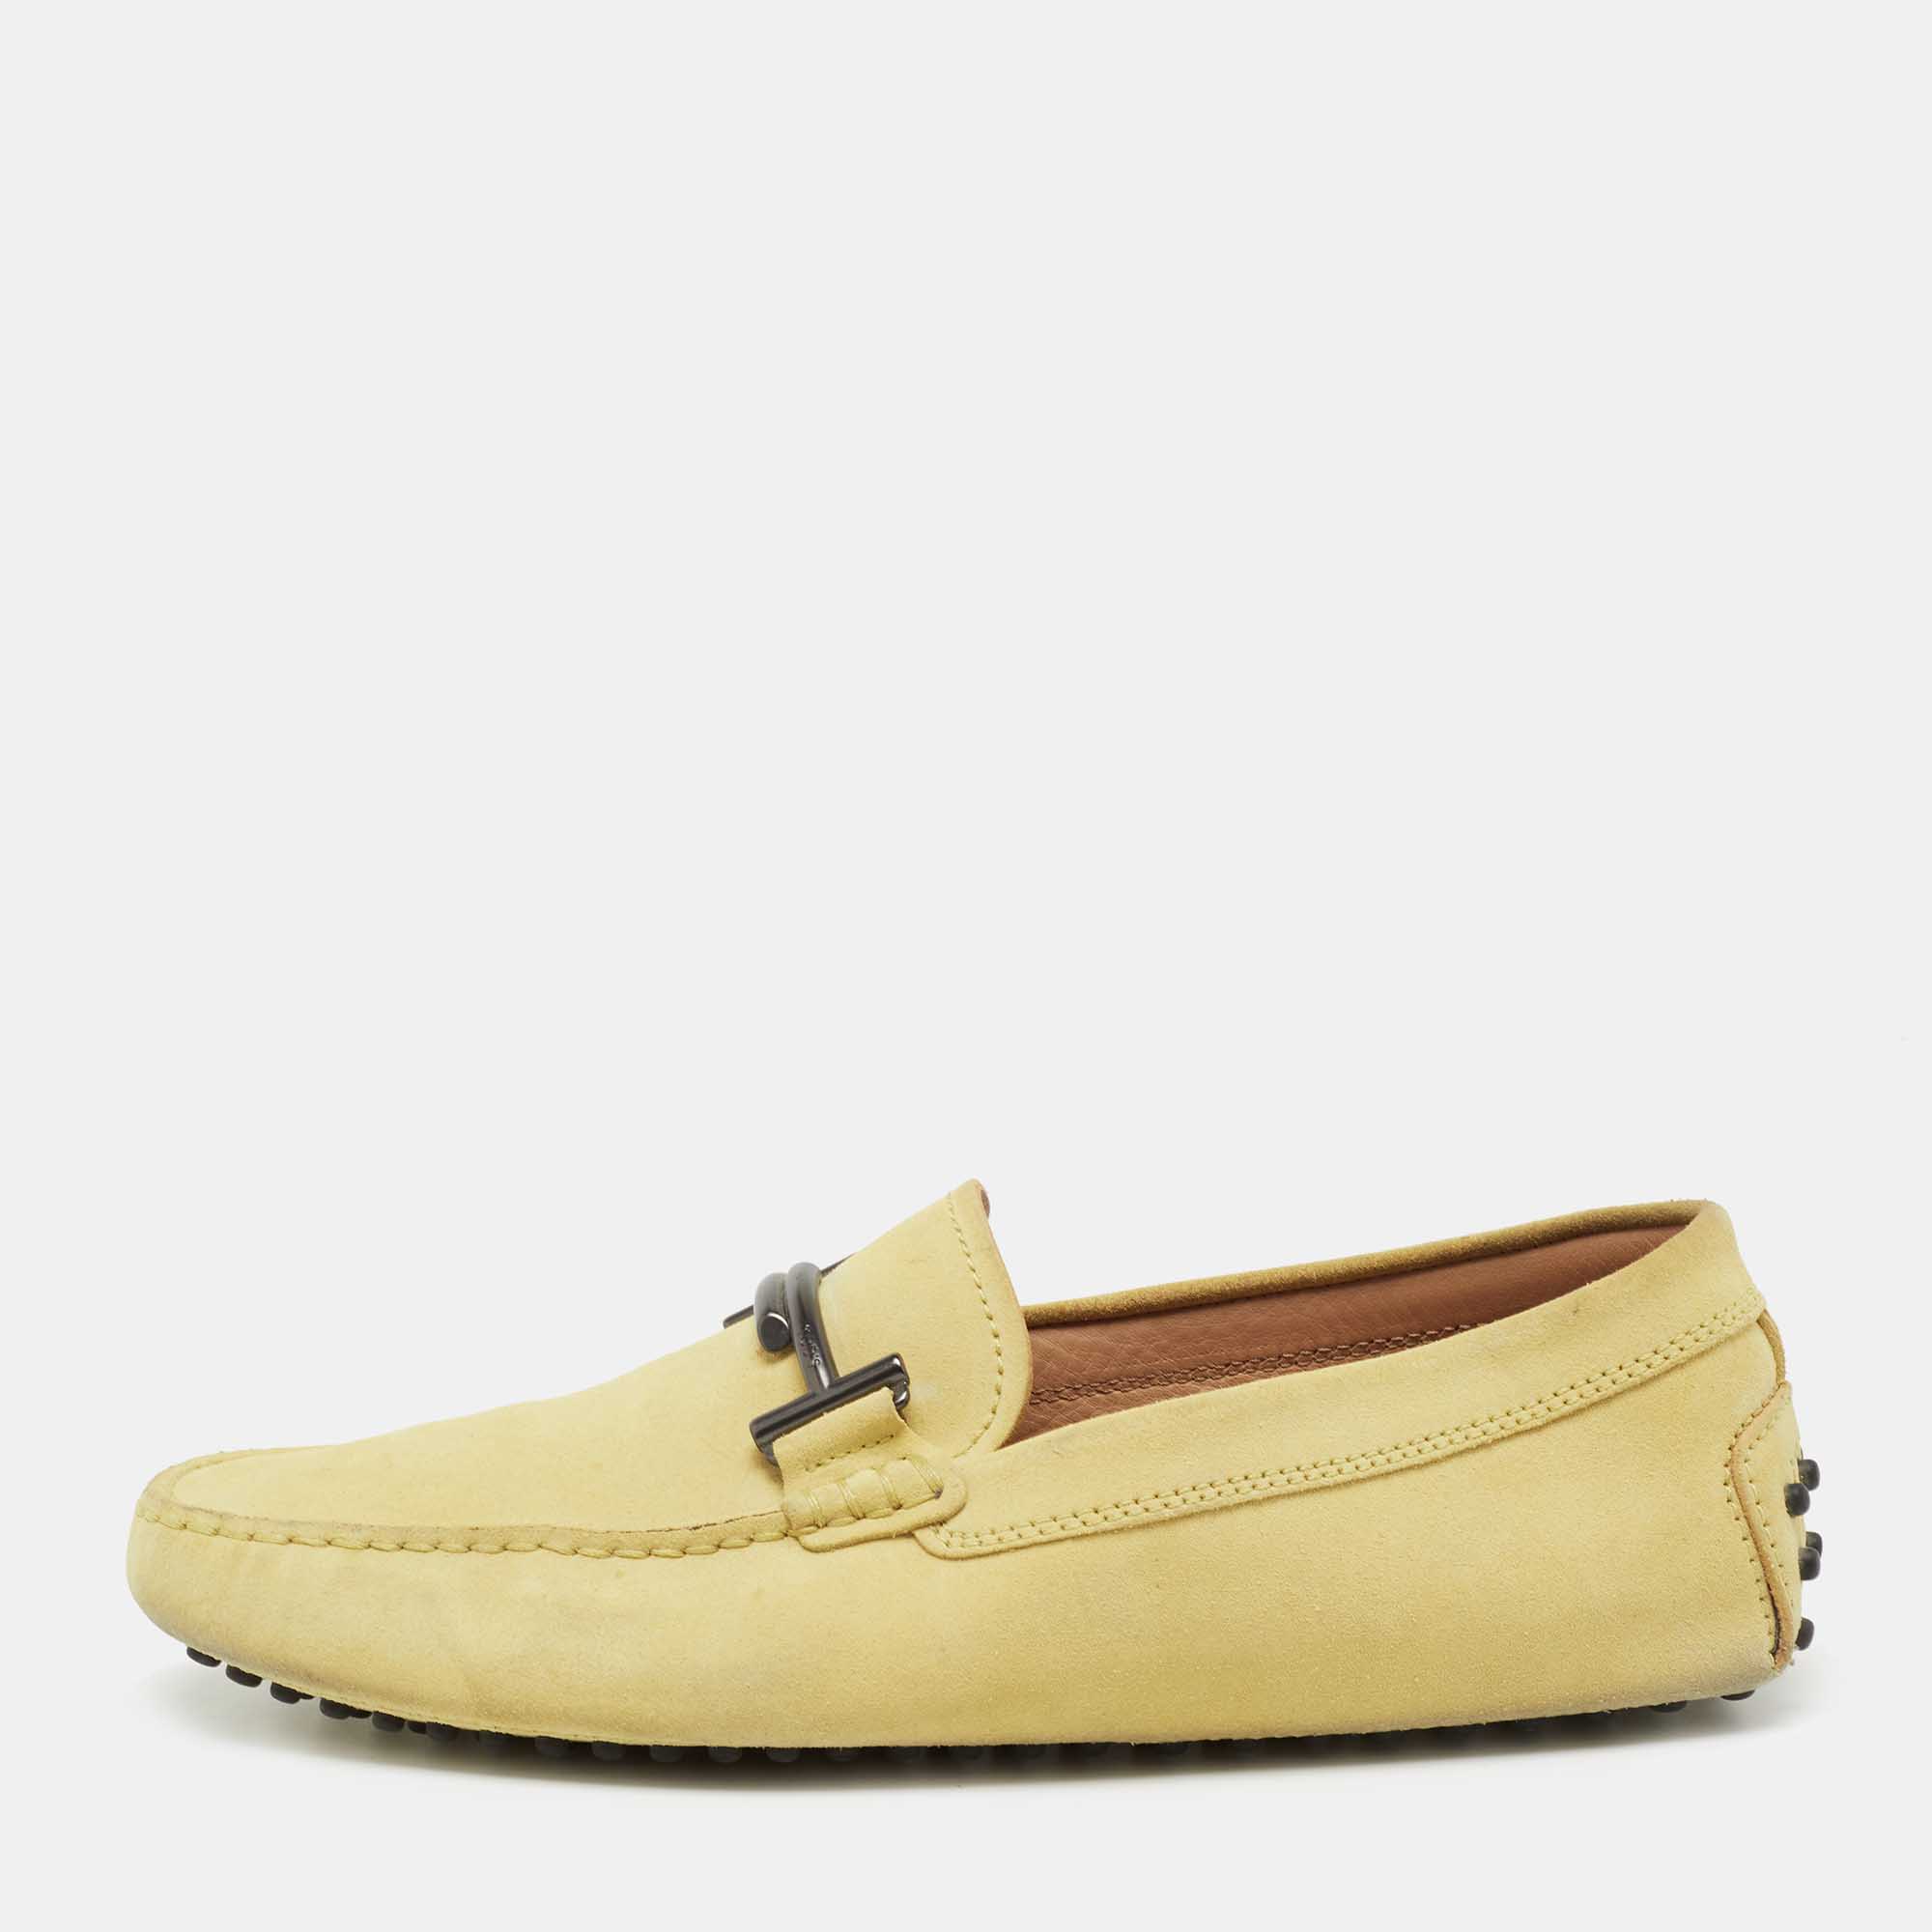 Tods yellow suede gommino double t driving loafers size 39.5